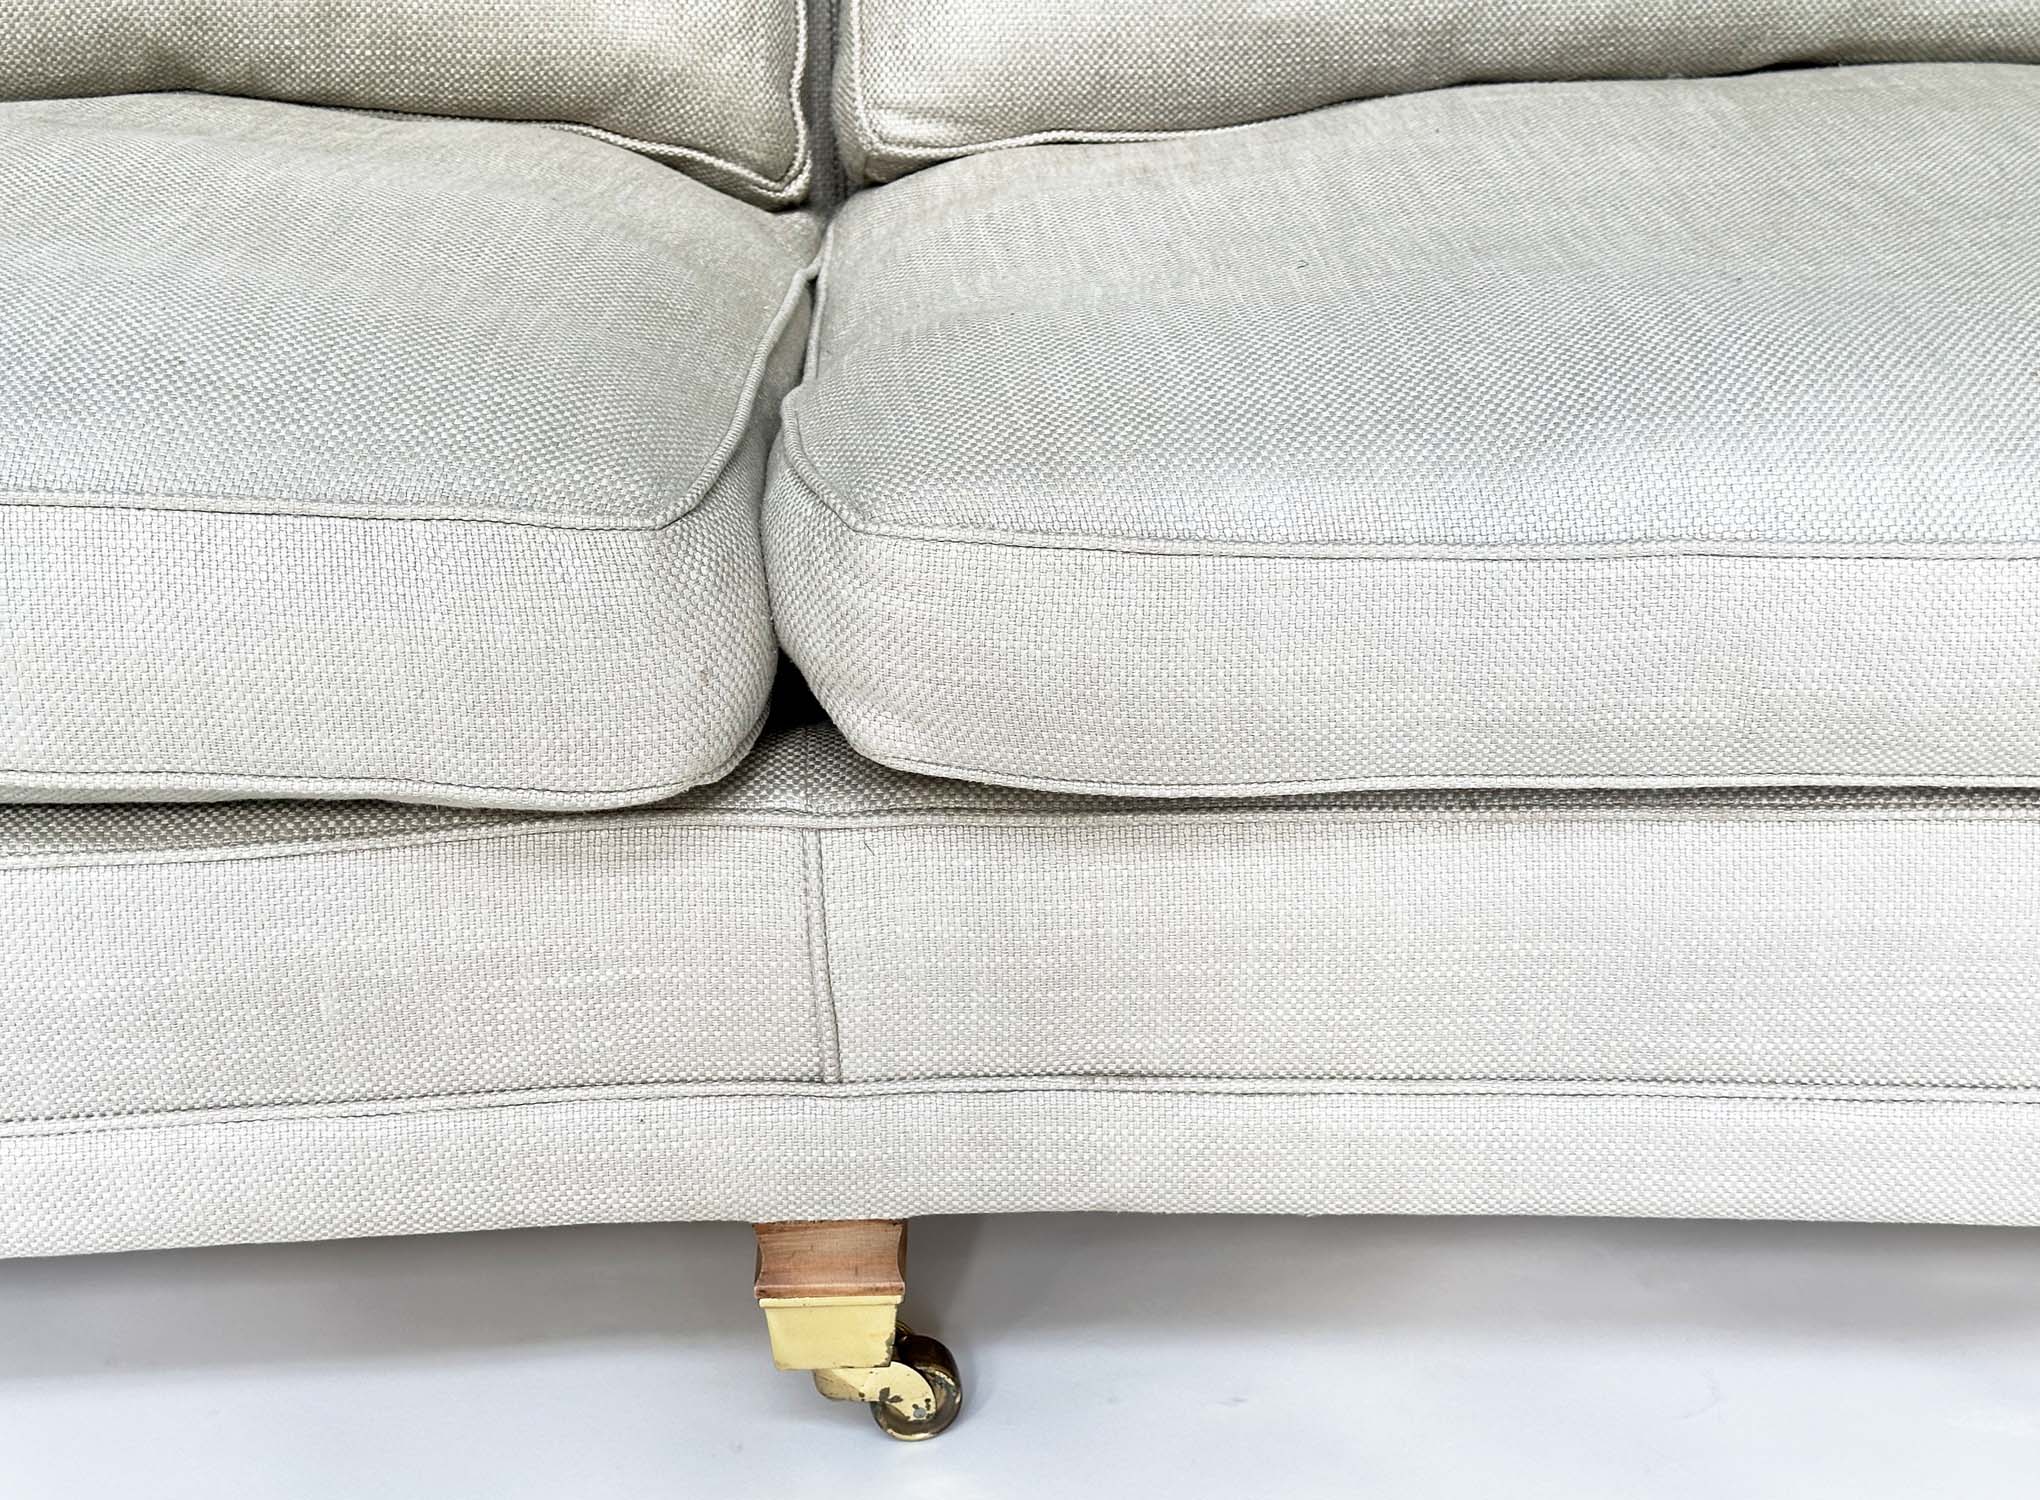 KNOLL SOFA BY DURESTA, grey linen upholstered with down swept arms, feather filled cushions and - Image 6 of 14